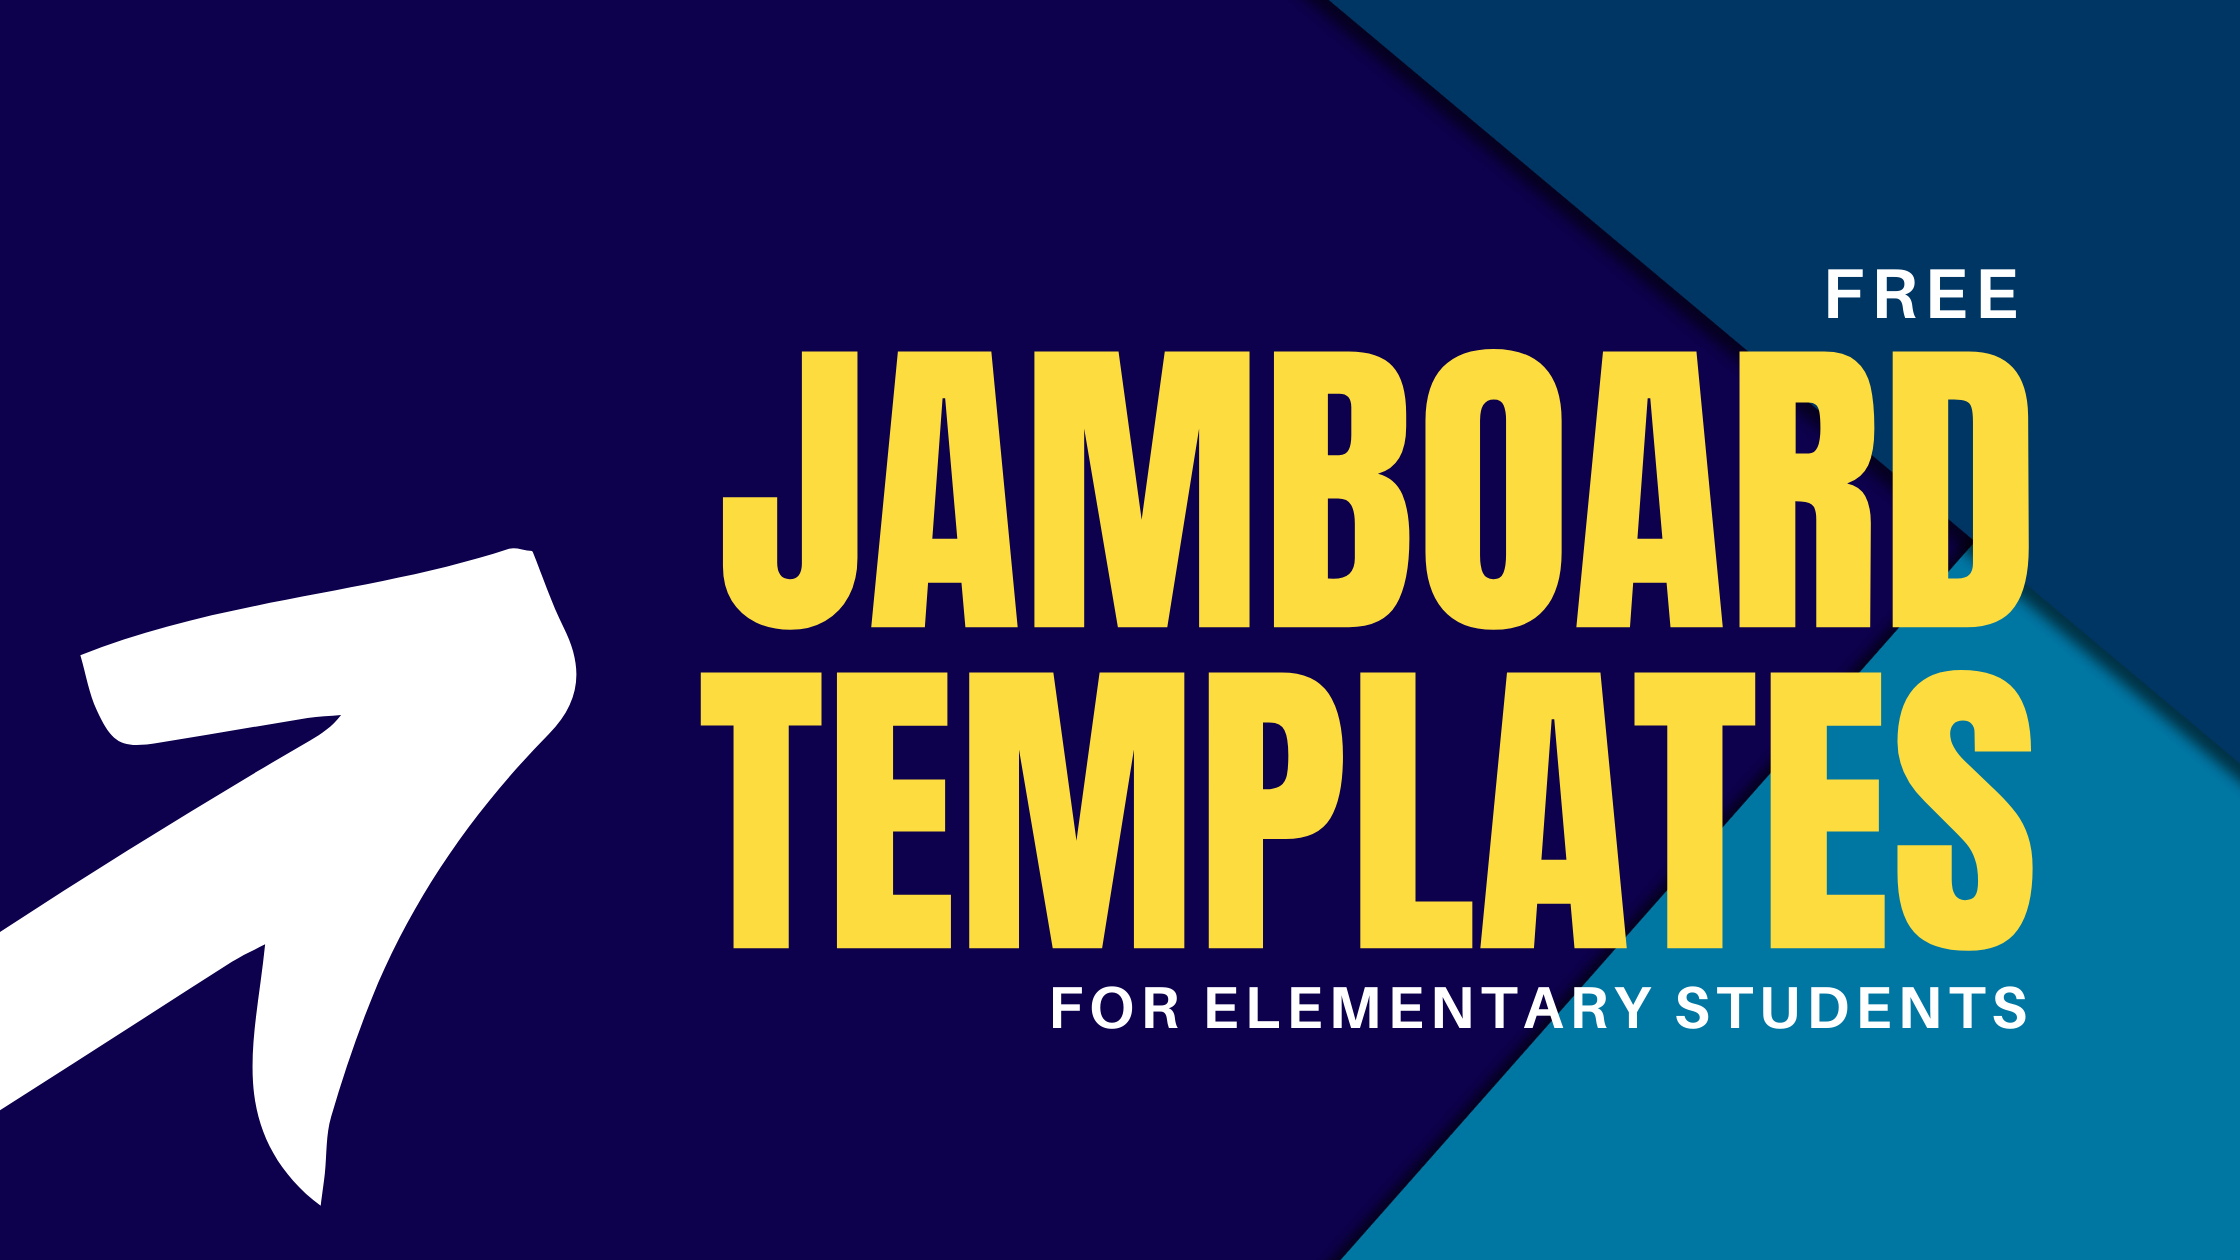 How to supercharge Google Jamboard with animated GIFs (FREE templates!) -  Ditch That Textbook